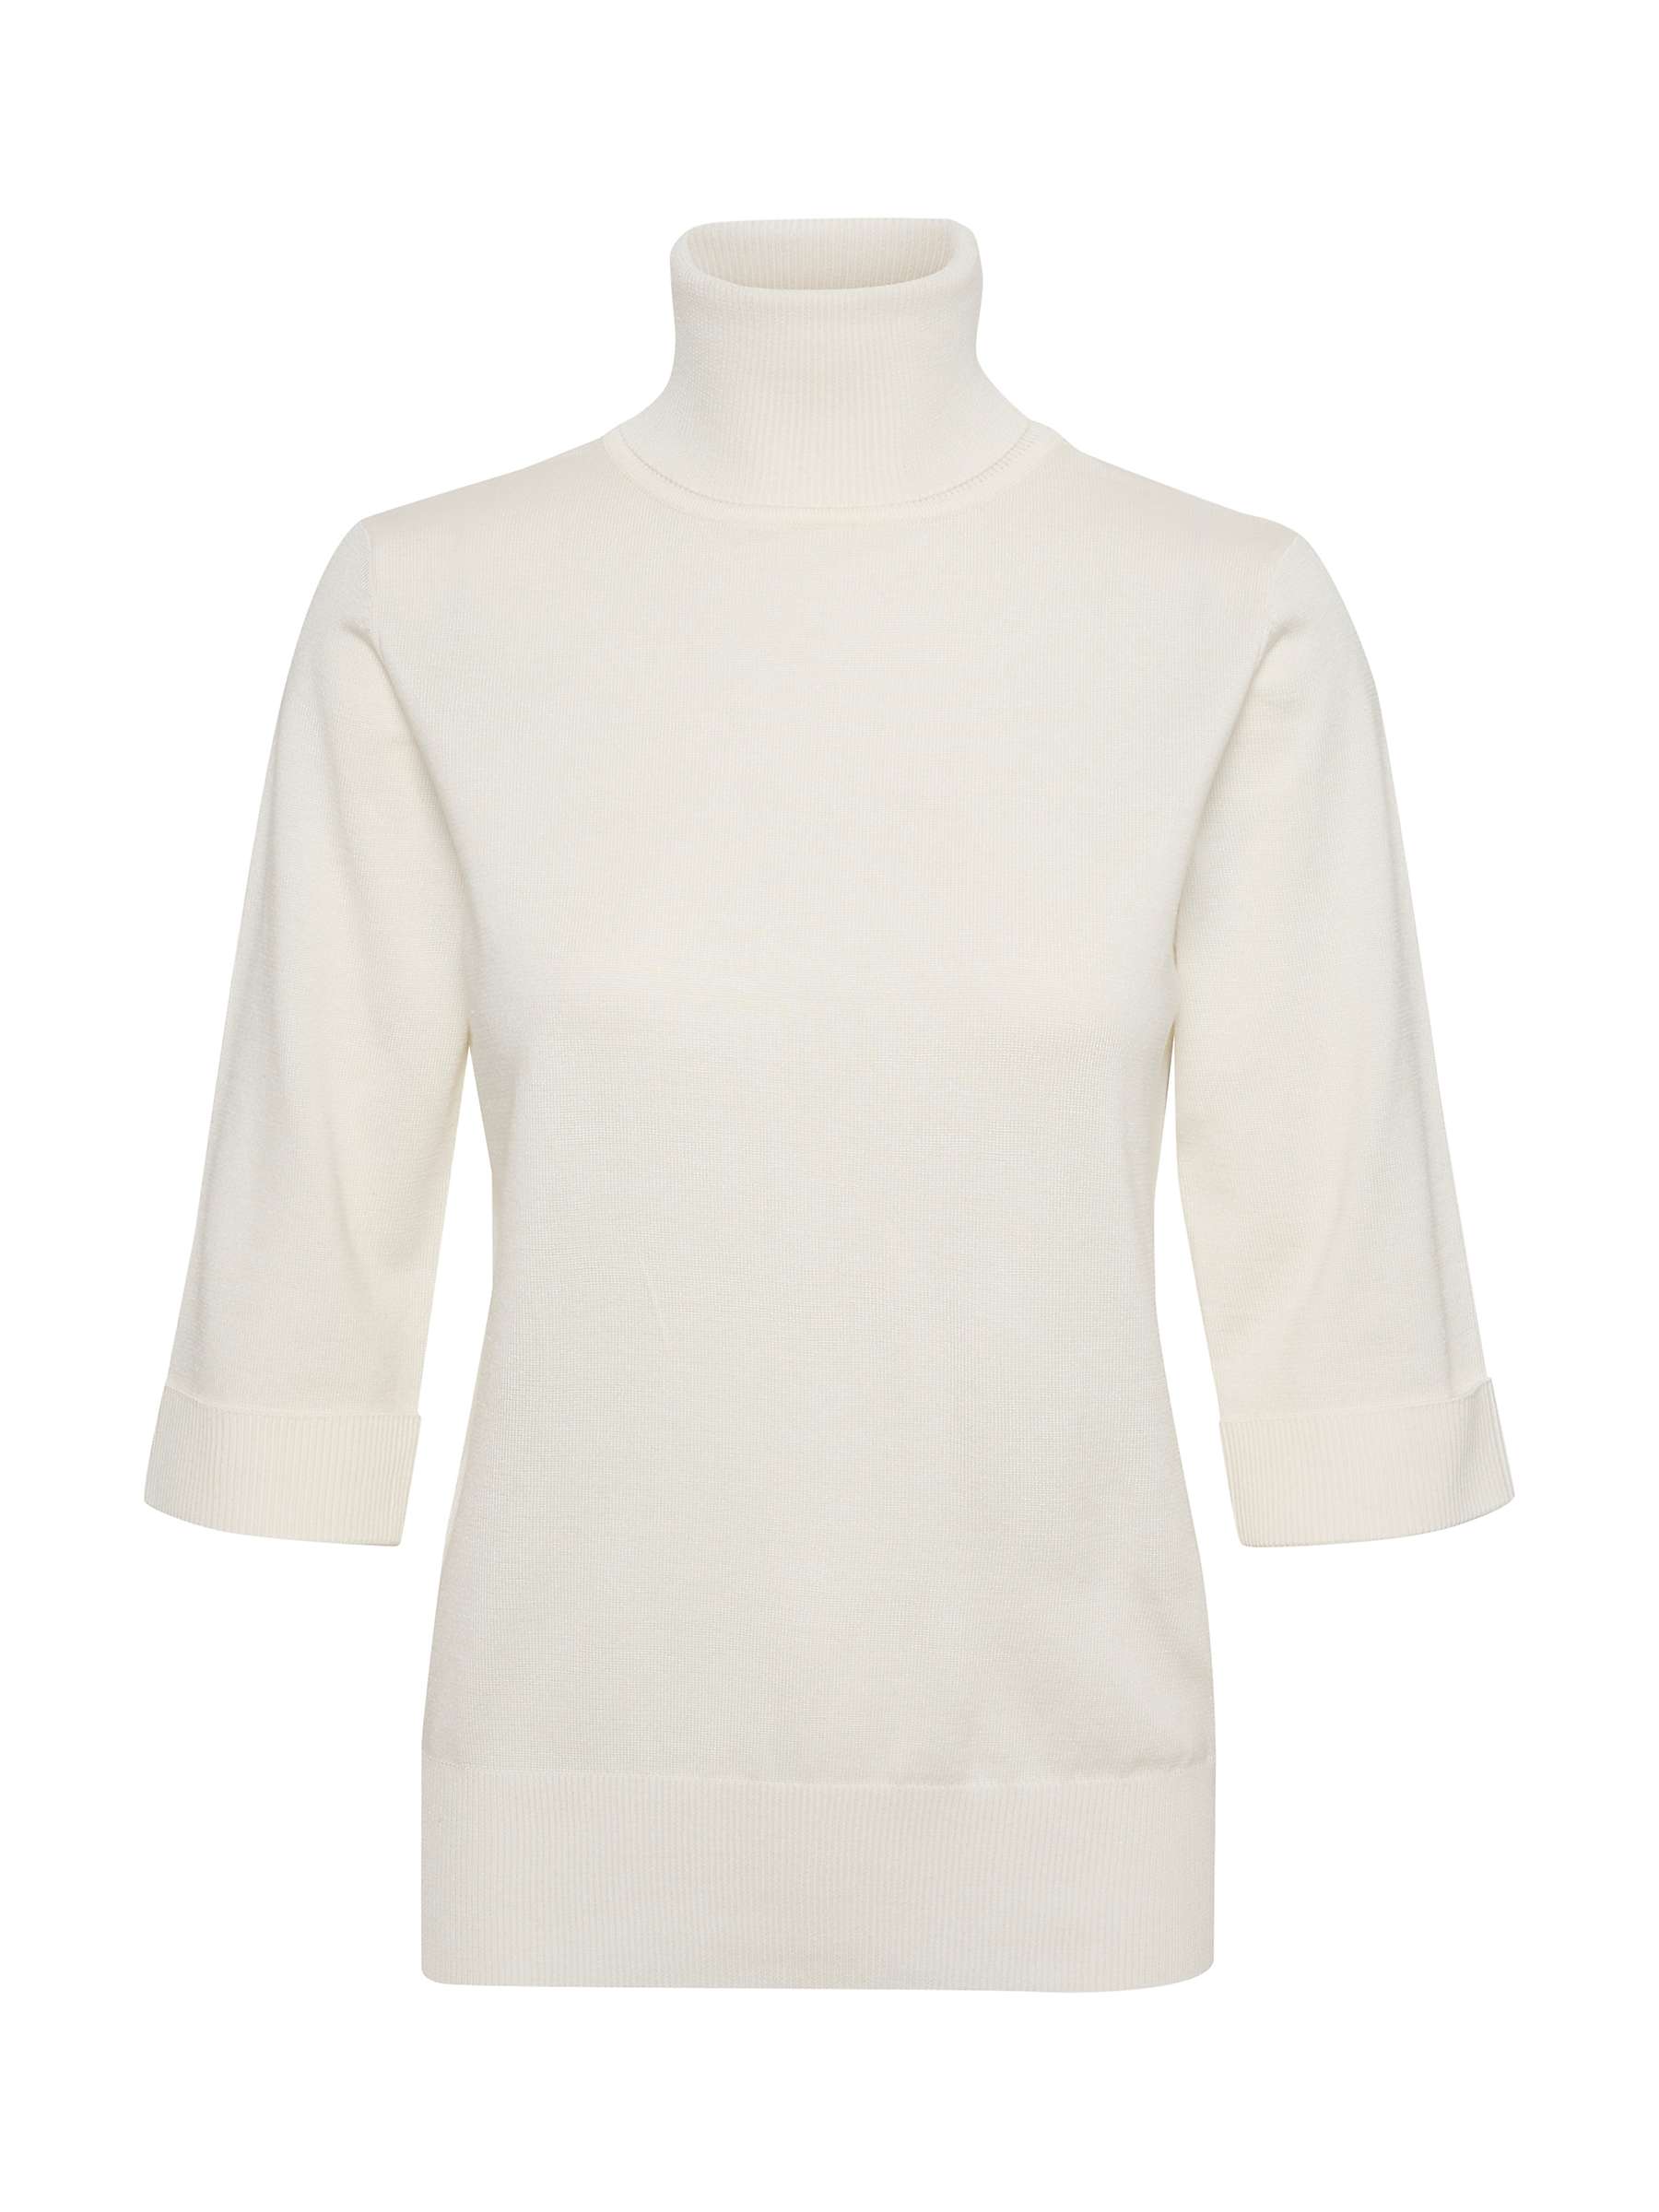 Buy Saint Tropez Cropped Sleeve Roll Neck Jumper, Ice Online at johnlewis.com